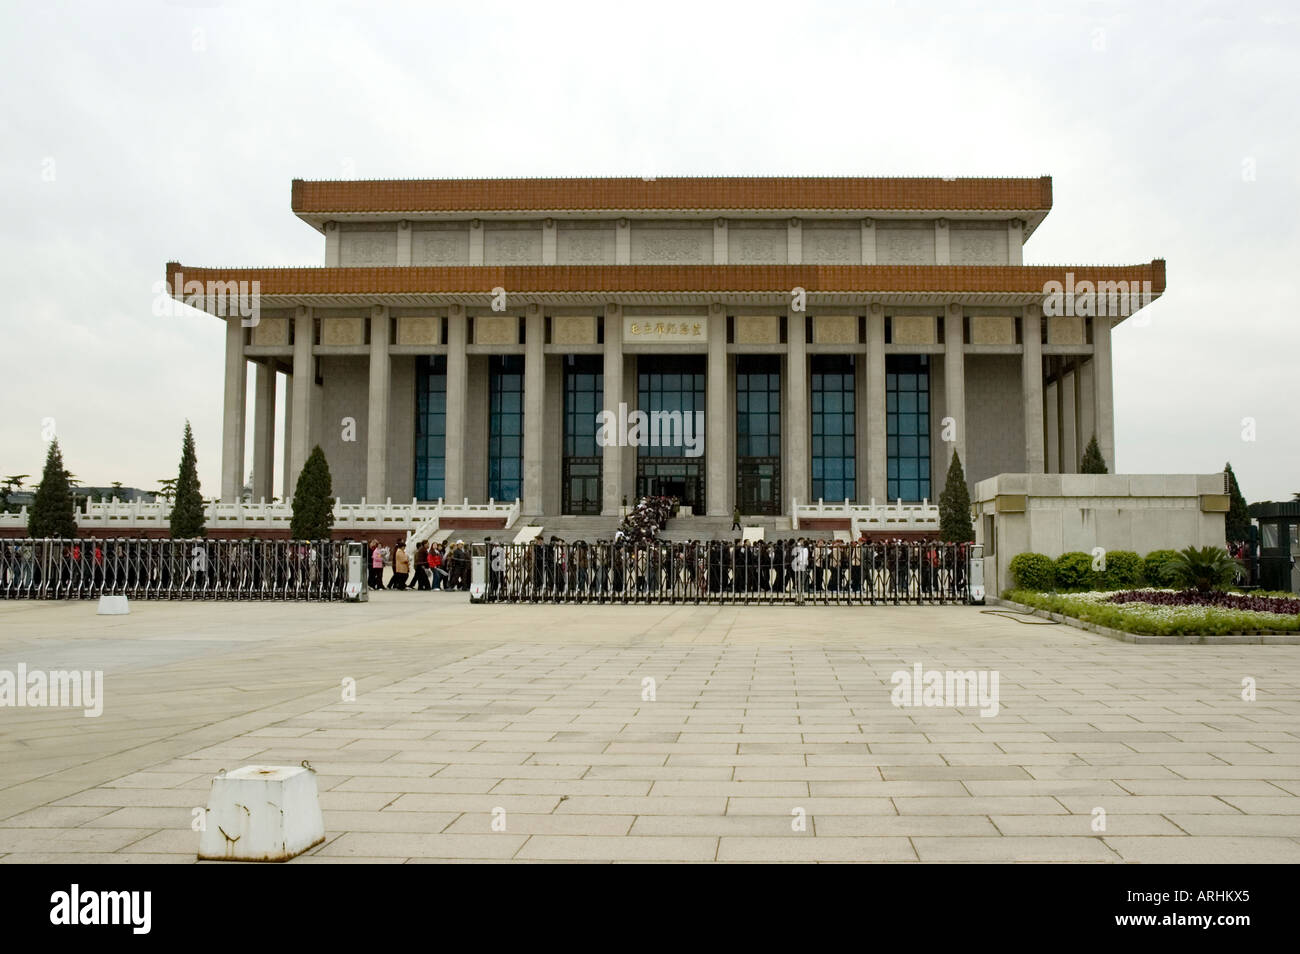 Visitors queuing to enter the Memorial Hall of Chairman Mao which has forty-four granite posts holding the double-eaved roof. Stock Photo